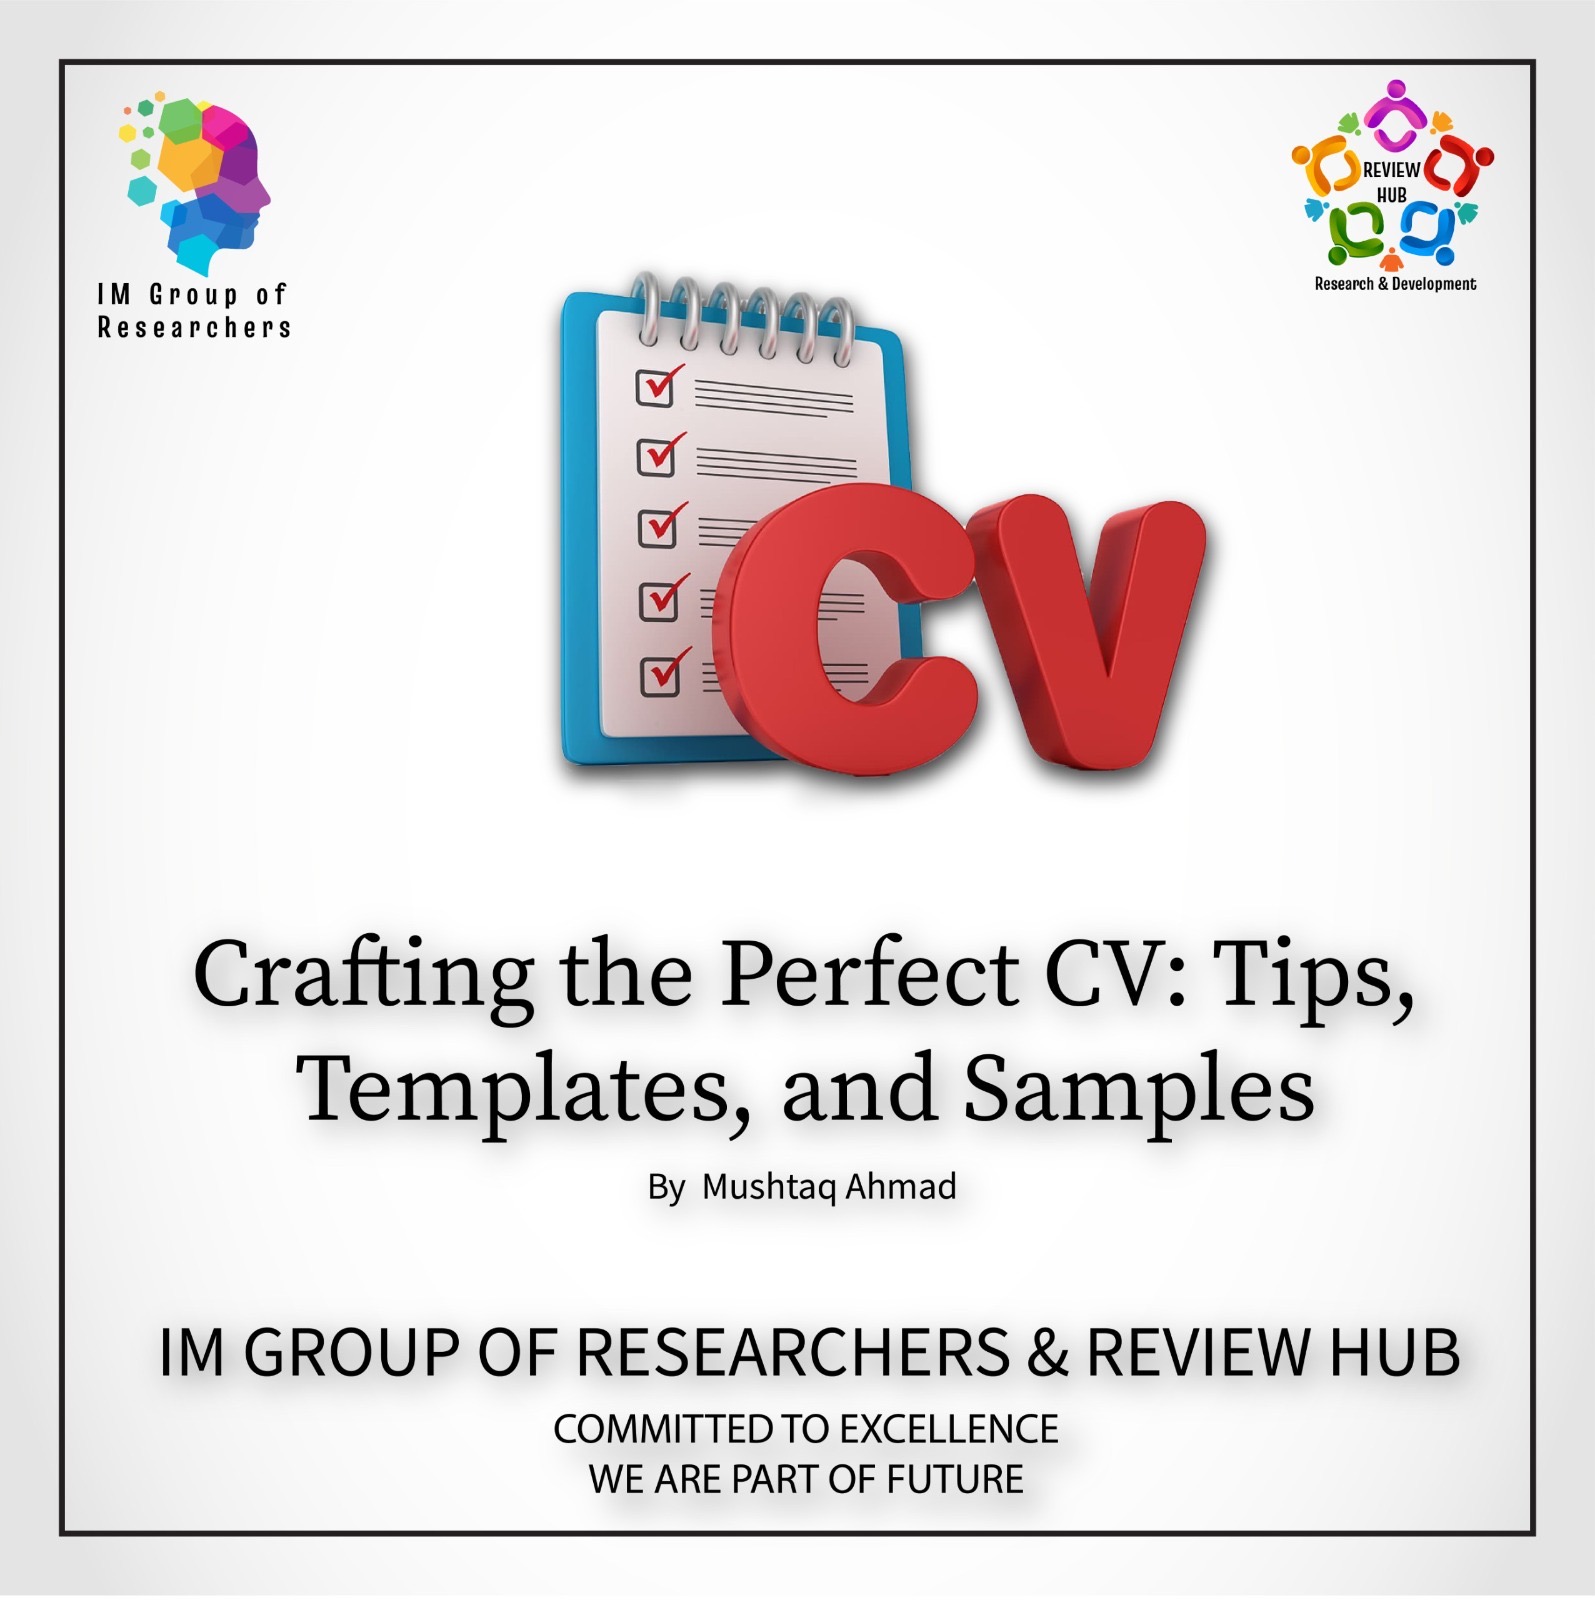 Crafting the Perfect CV: Tips, Templates, and Samples